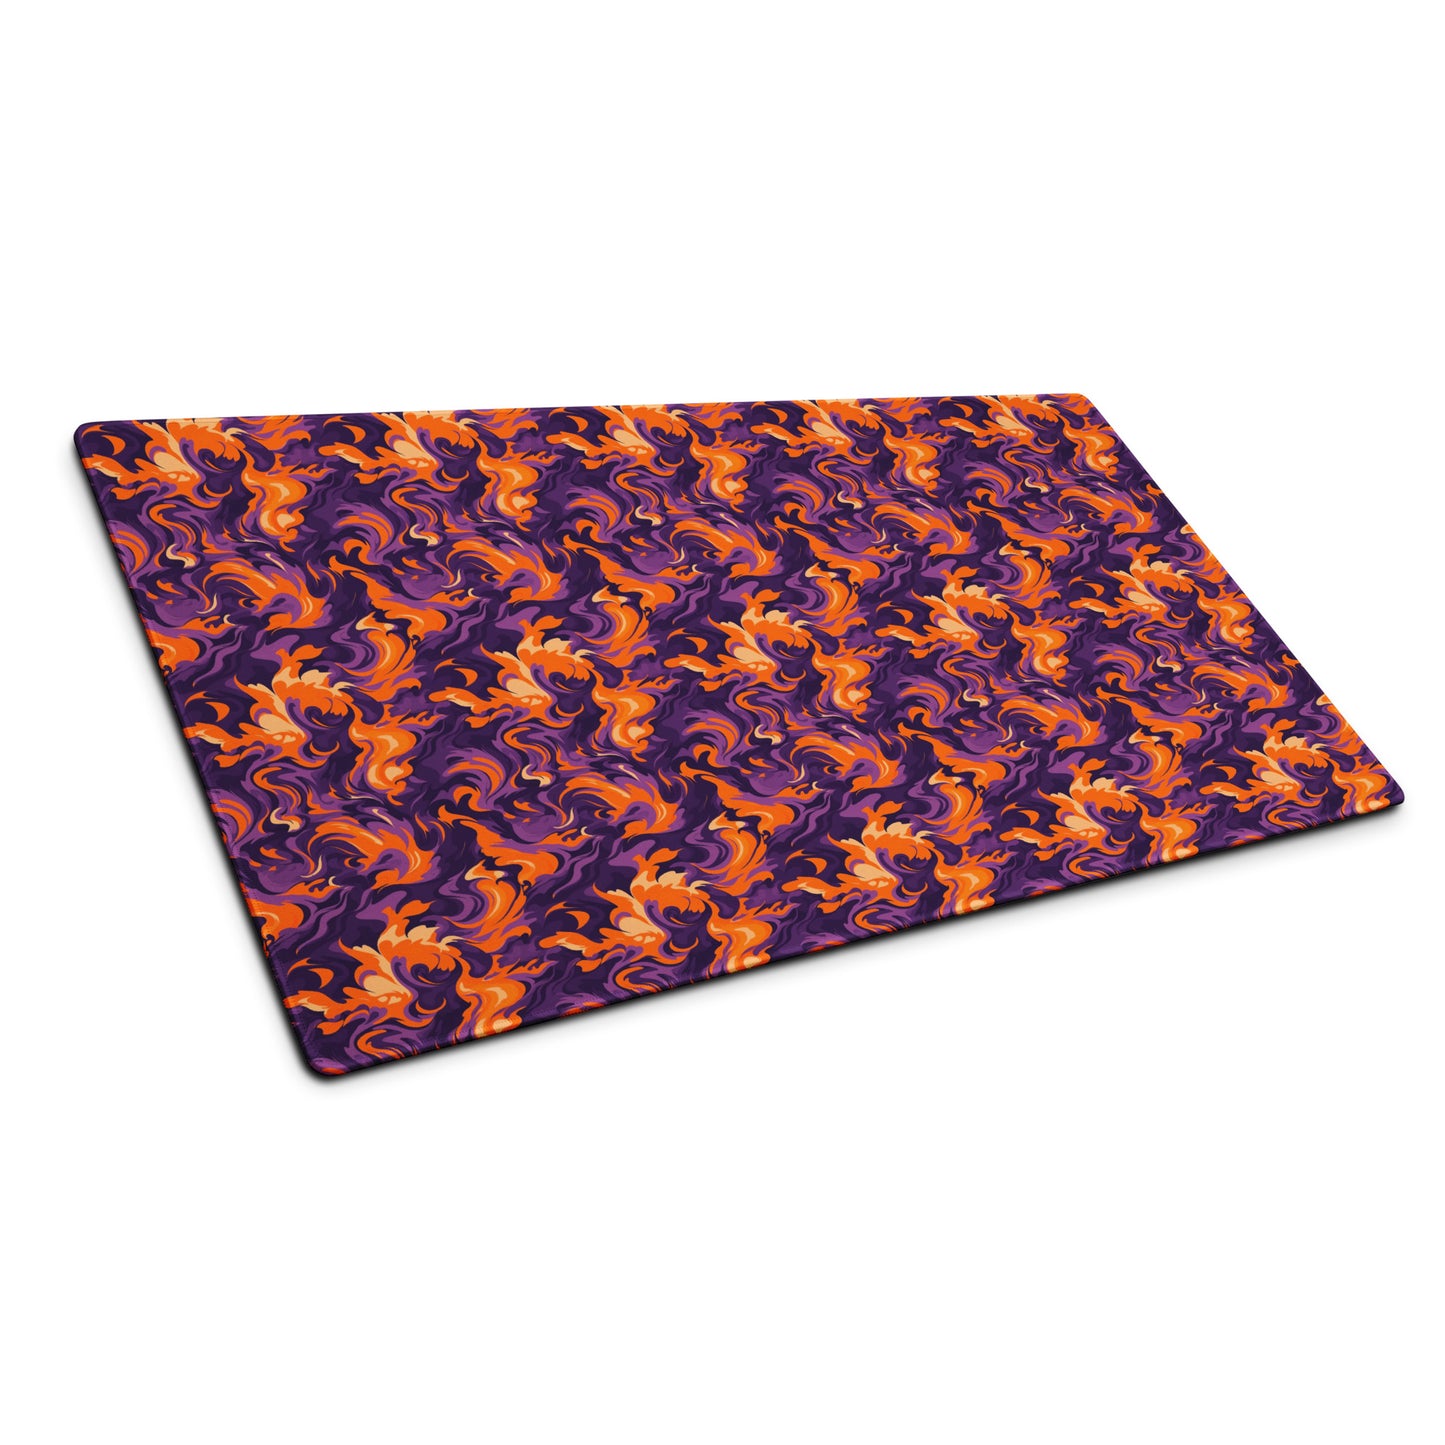 A 36" x 18" desk pad with a purple and orange camo pattern sitting at an angle.